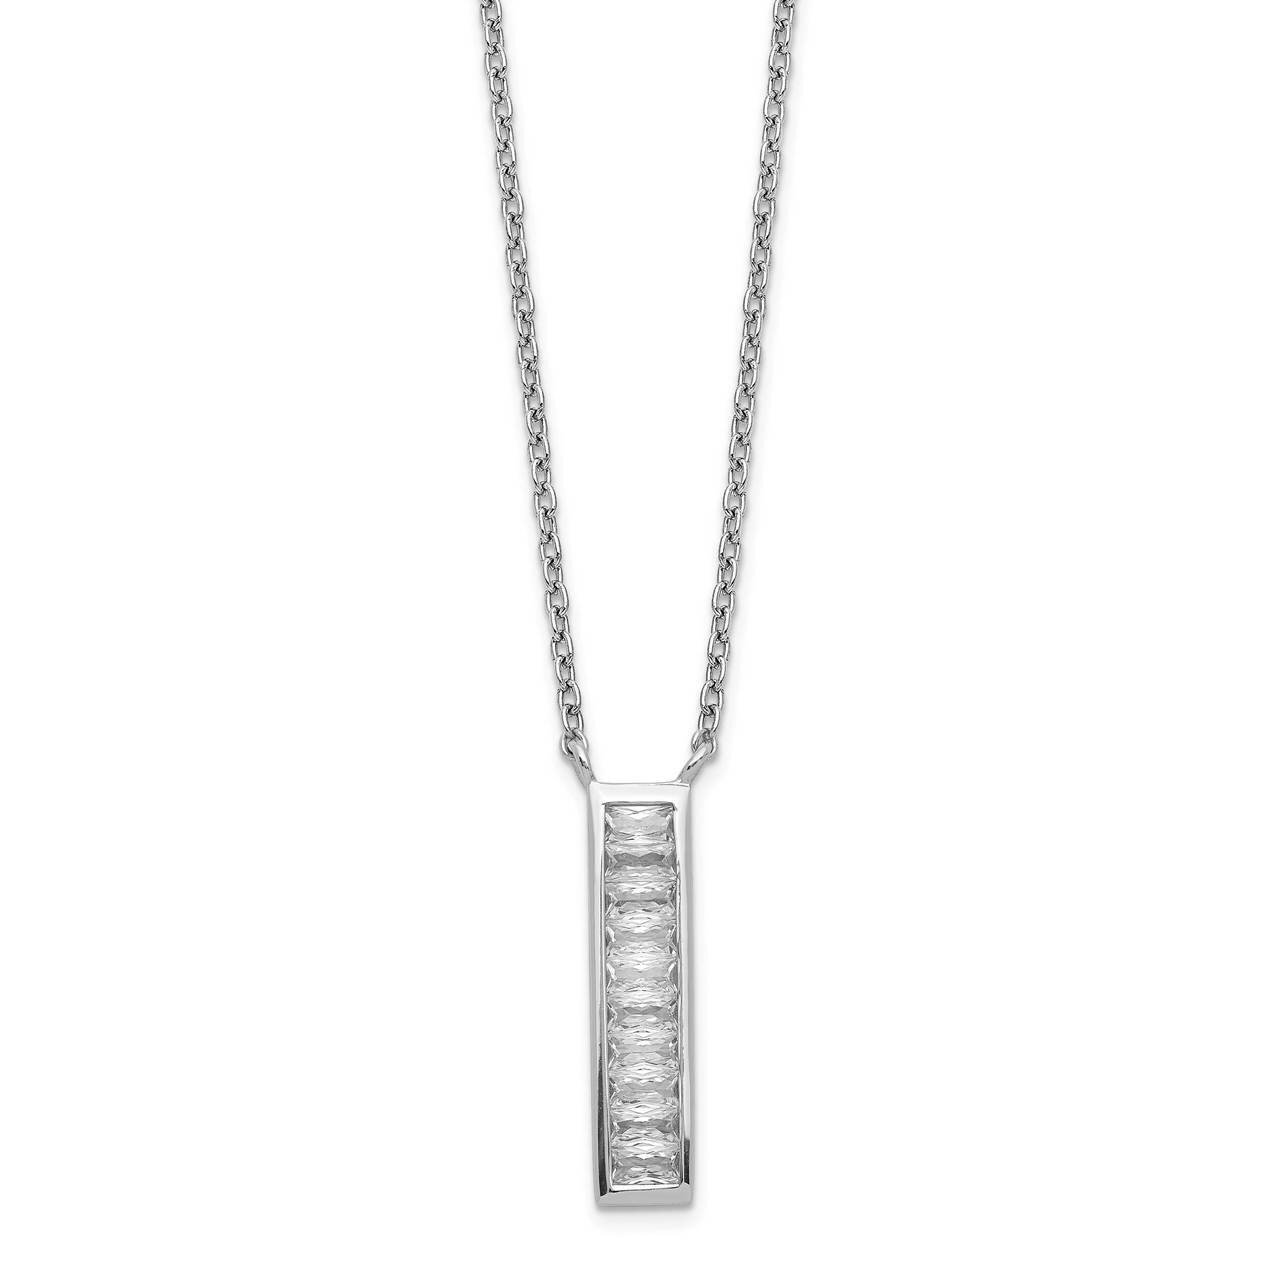 Necklace Sterling Silver Rhodium Plated CZ Diamond QG5497-17.5